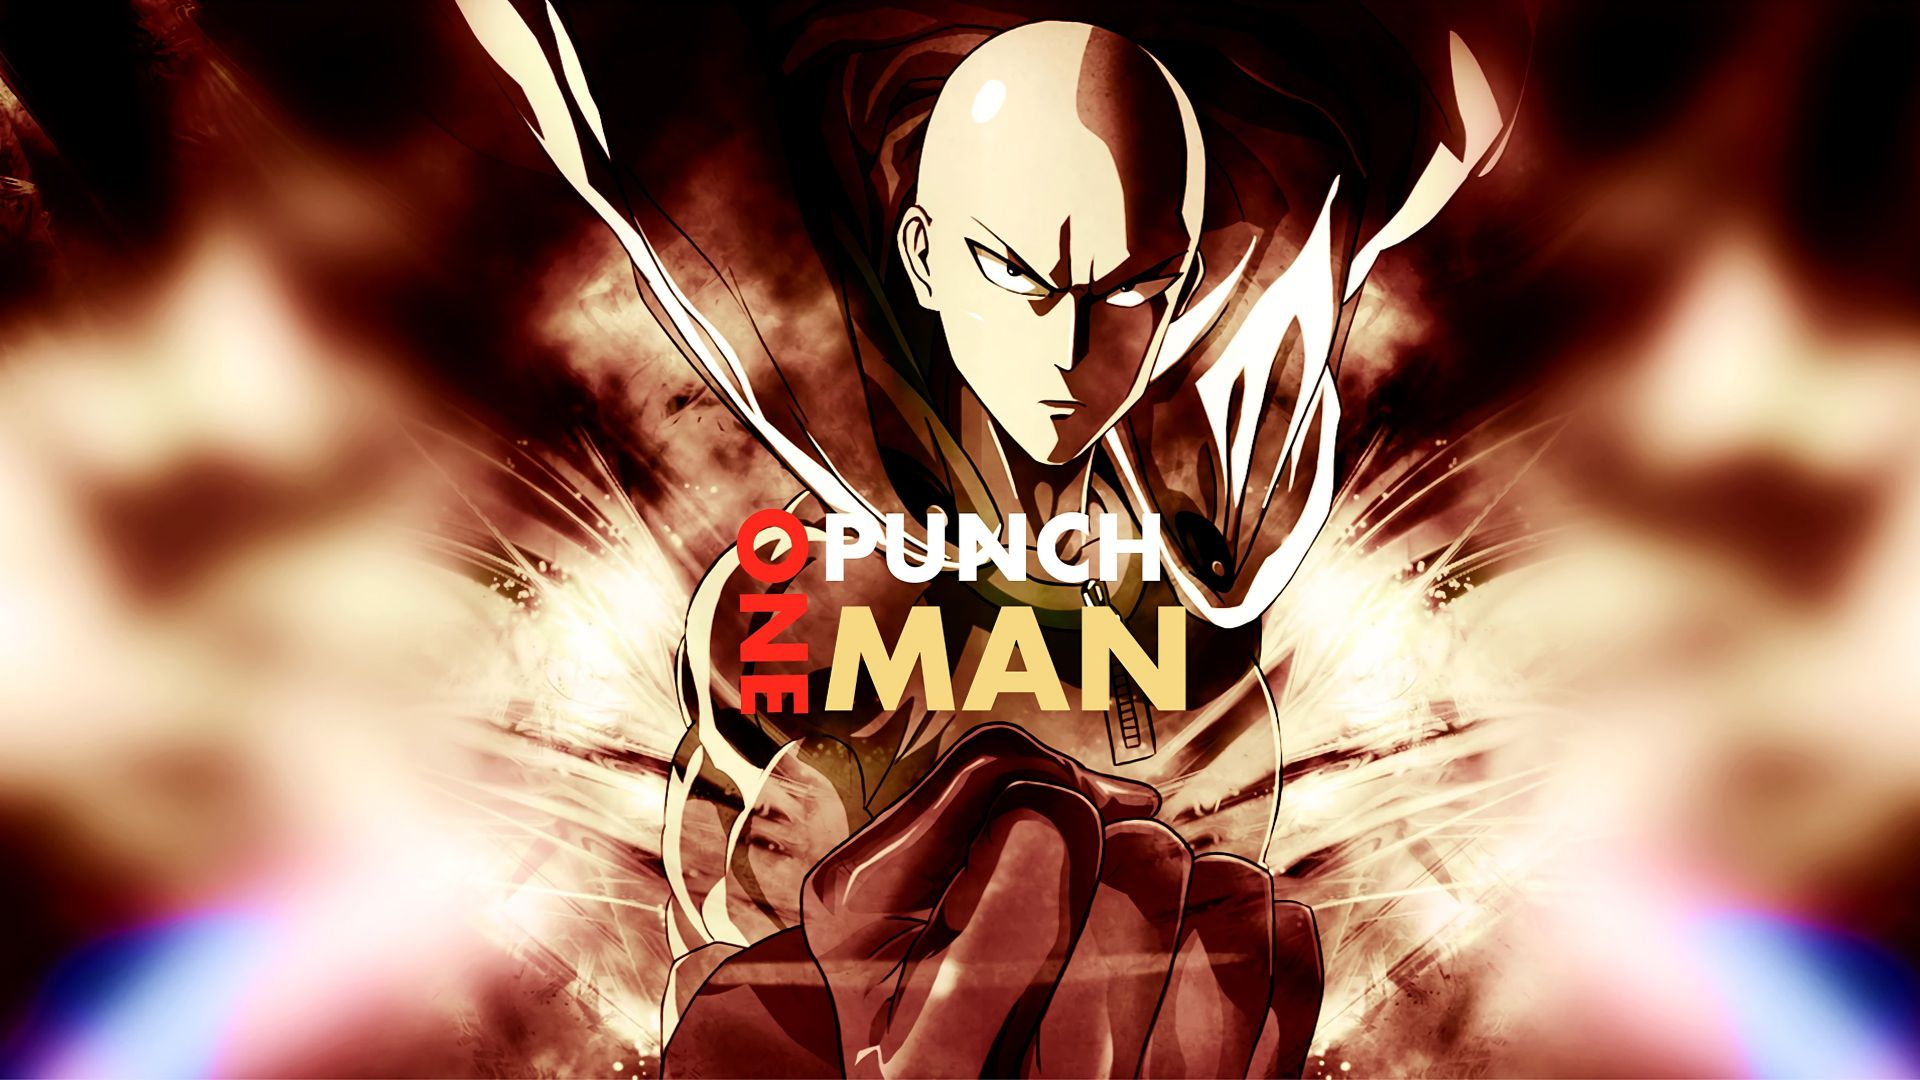 1920x1080 One Punch Man Wallpaper: Top Free One Punch Man Backgrounds, Pictures \u0026 Images Download